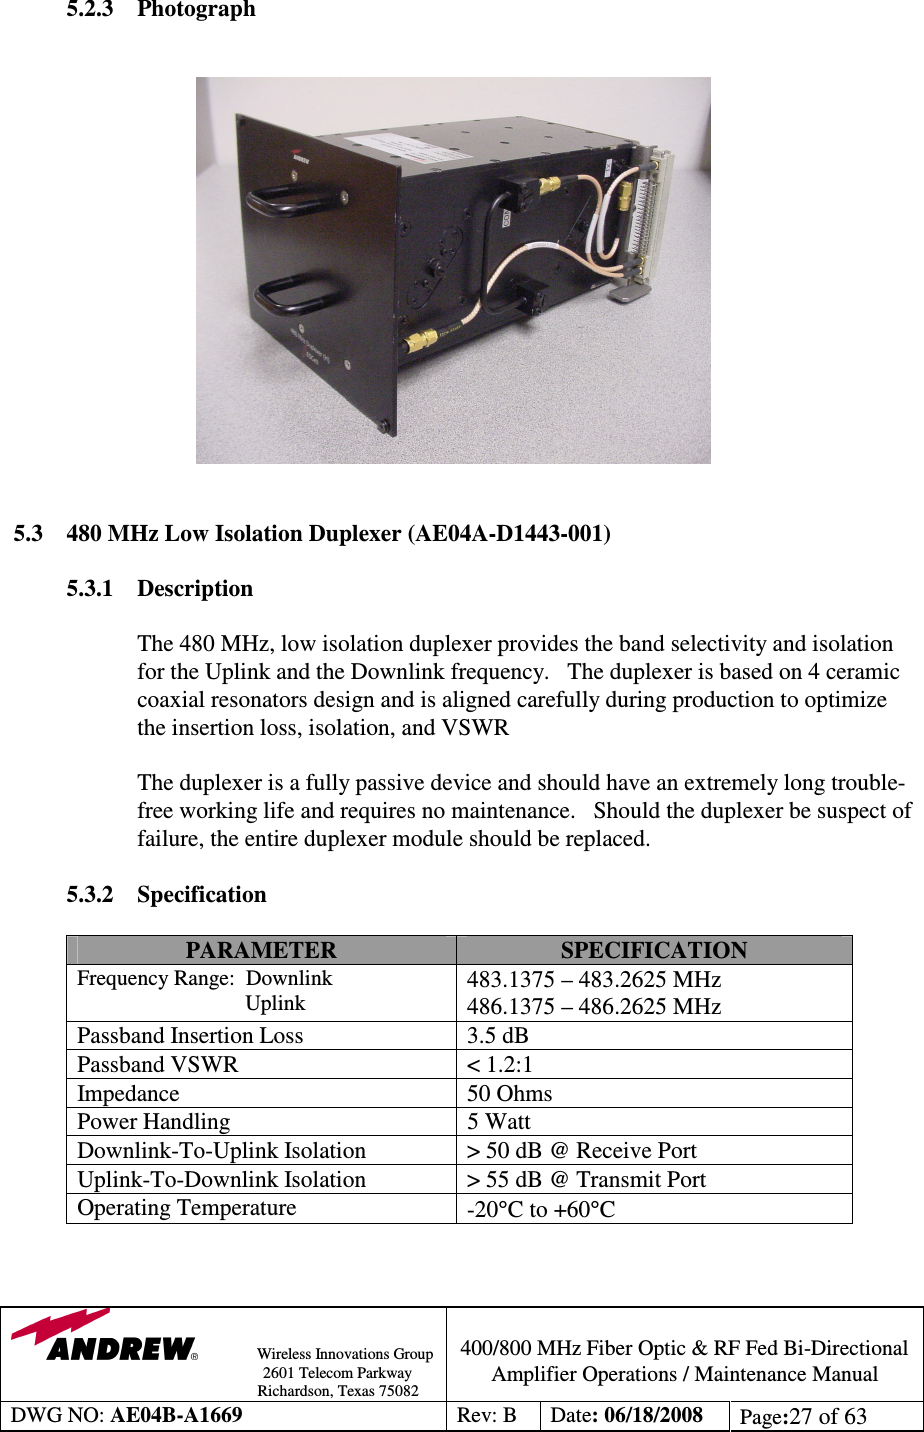                Wireless Innovations Group                                                                                        2601 Telecom Parkway                                                         Richardson, Texas 75082  400/800 MHz Fiber Optic &amp; RF Fed Bi-Directional Amplifier Operations / Maintenance Manual DWG NO: AE04B-A1669  Rev: B  Date: 06/18/2008  Page:27 of 63  5.2.3 Photograph                 5.3  480 MHz Low Isolation Duplexer (AE04A-D1443-001)  5.3.1  Description  The 480 MHz, low isolation duplexer provides the band selectivity and isolation for the Uplink and the Downlink frequency.   The duplexer is based on 4 ceramic coaxial resonators design and is aligned carefully during production to optimize the insertion loss, isolation, and VSWR             The duplexer is a fully passive device and should have an extremely long trouble-free working life and requires no maintenance.   Should the duplexer be suspect of failure, the entire duplexer module should be replaced.    5.3.2 Specification  PARAMETER  SPECIFICATION Frequency Range:  Downlink                                Uplink 483.1375 – 483.2625 MHz 486.1375 – 486.2625 MHz Passband Insertion Loss  3.5 dB Passband VSWR  &lt; 1.2:1 Impedance  50 Ohms Power Handling  5 Watt Downlink-To-Uplink Isolation  &gt; 50 dB @ Receive Port  Uplink-To-Downlink Isolation  &gt; 55 dB @ Transmit Port Operating Temperature  -20°C to +60°C   